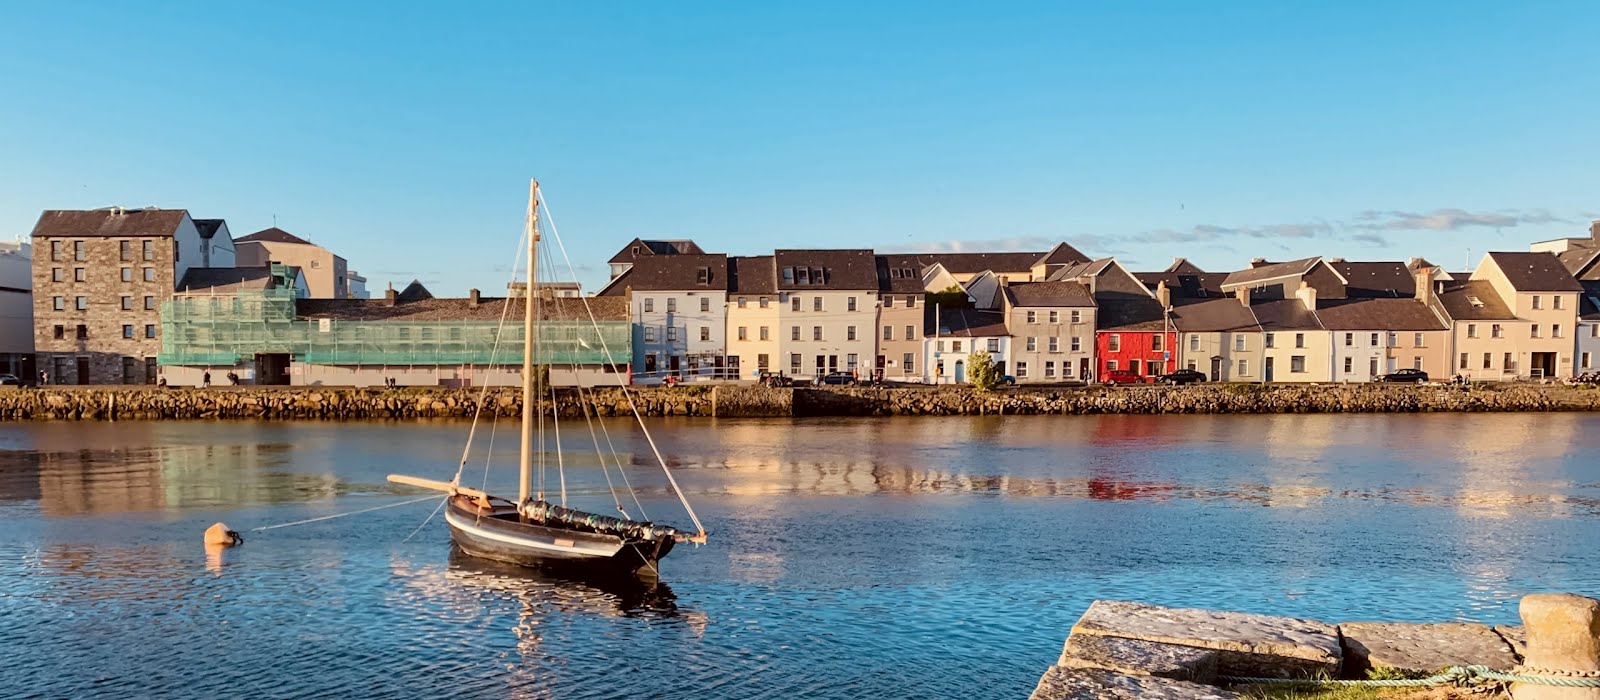 The Great Getaway: The best things to see and do around Galway this Easter